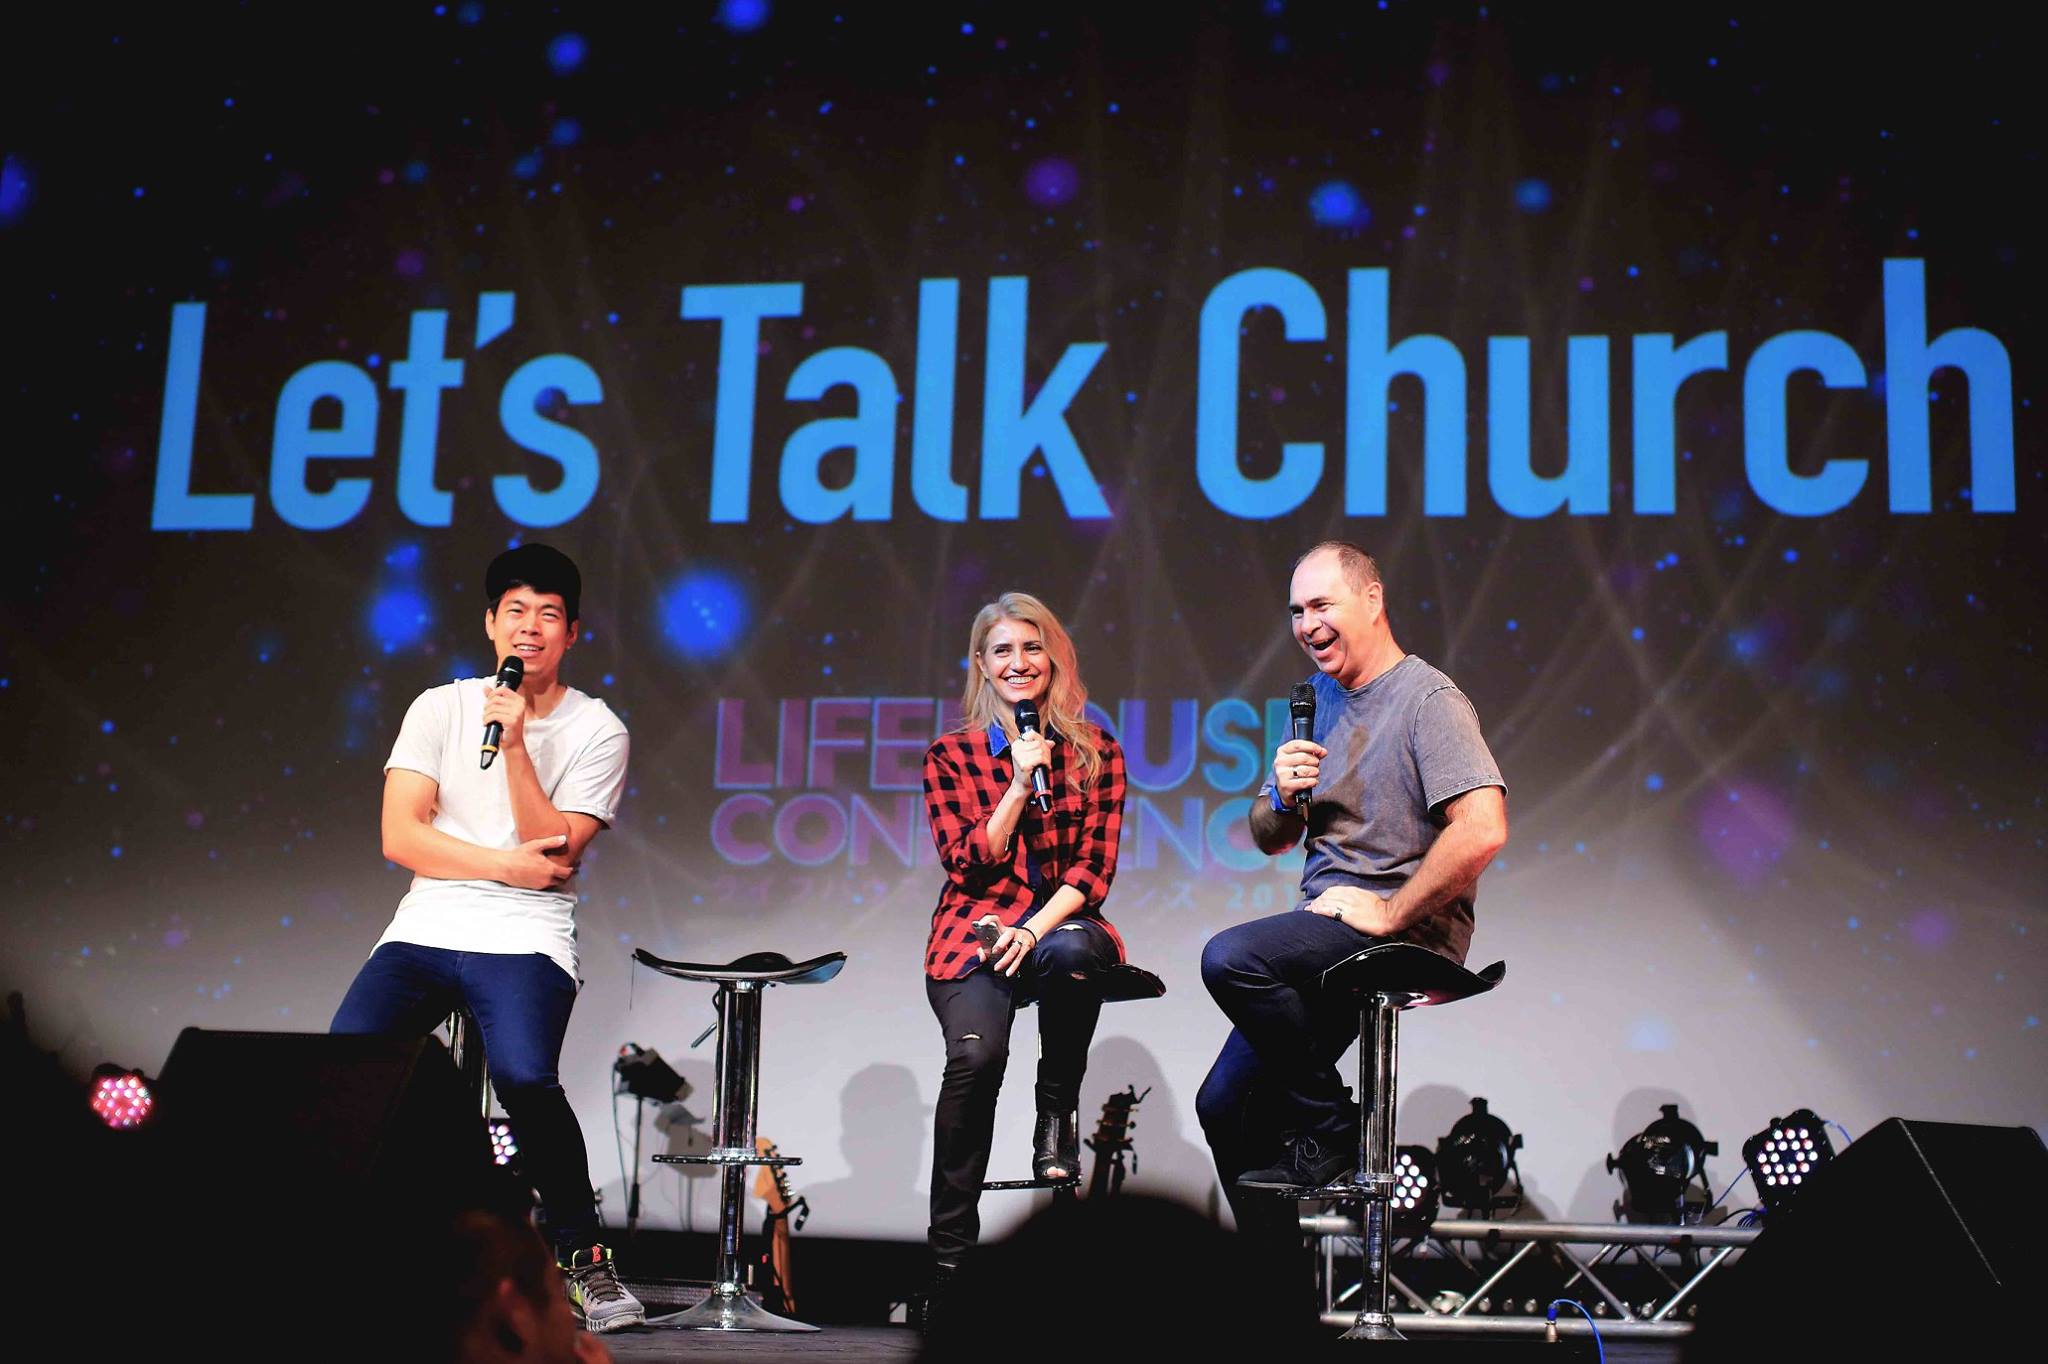 Lifehouse Conference 2015